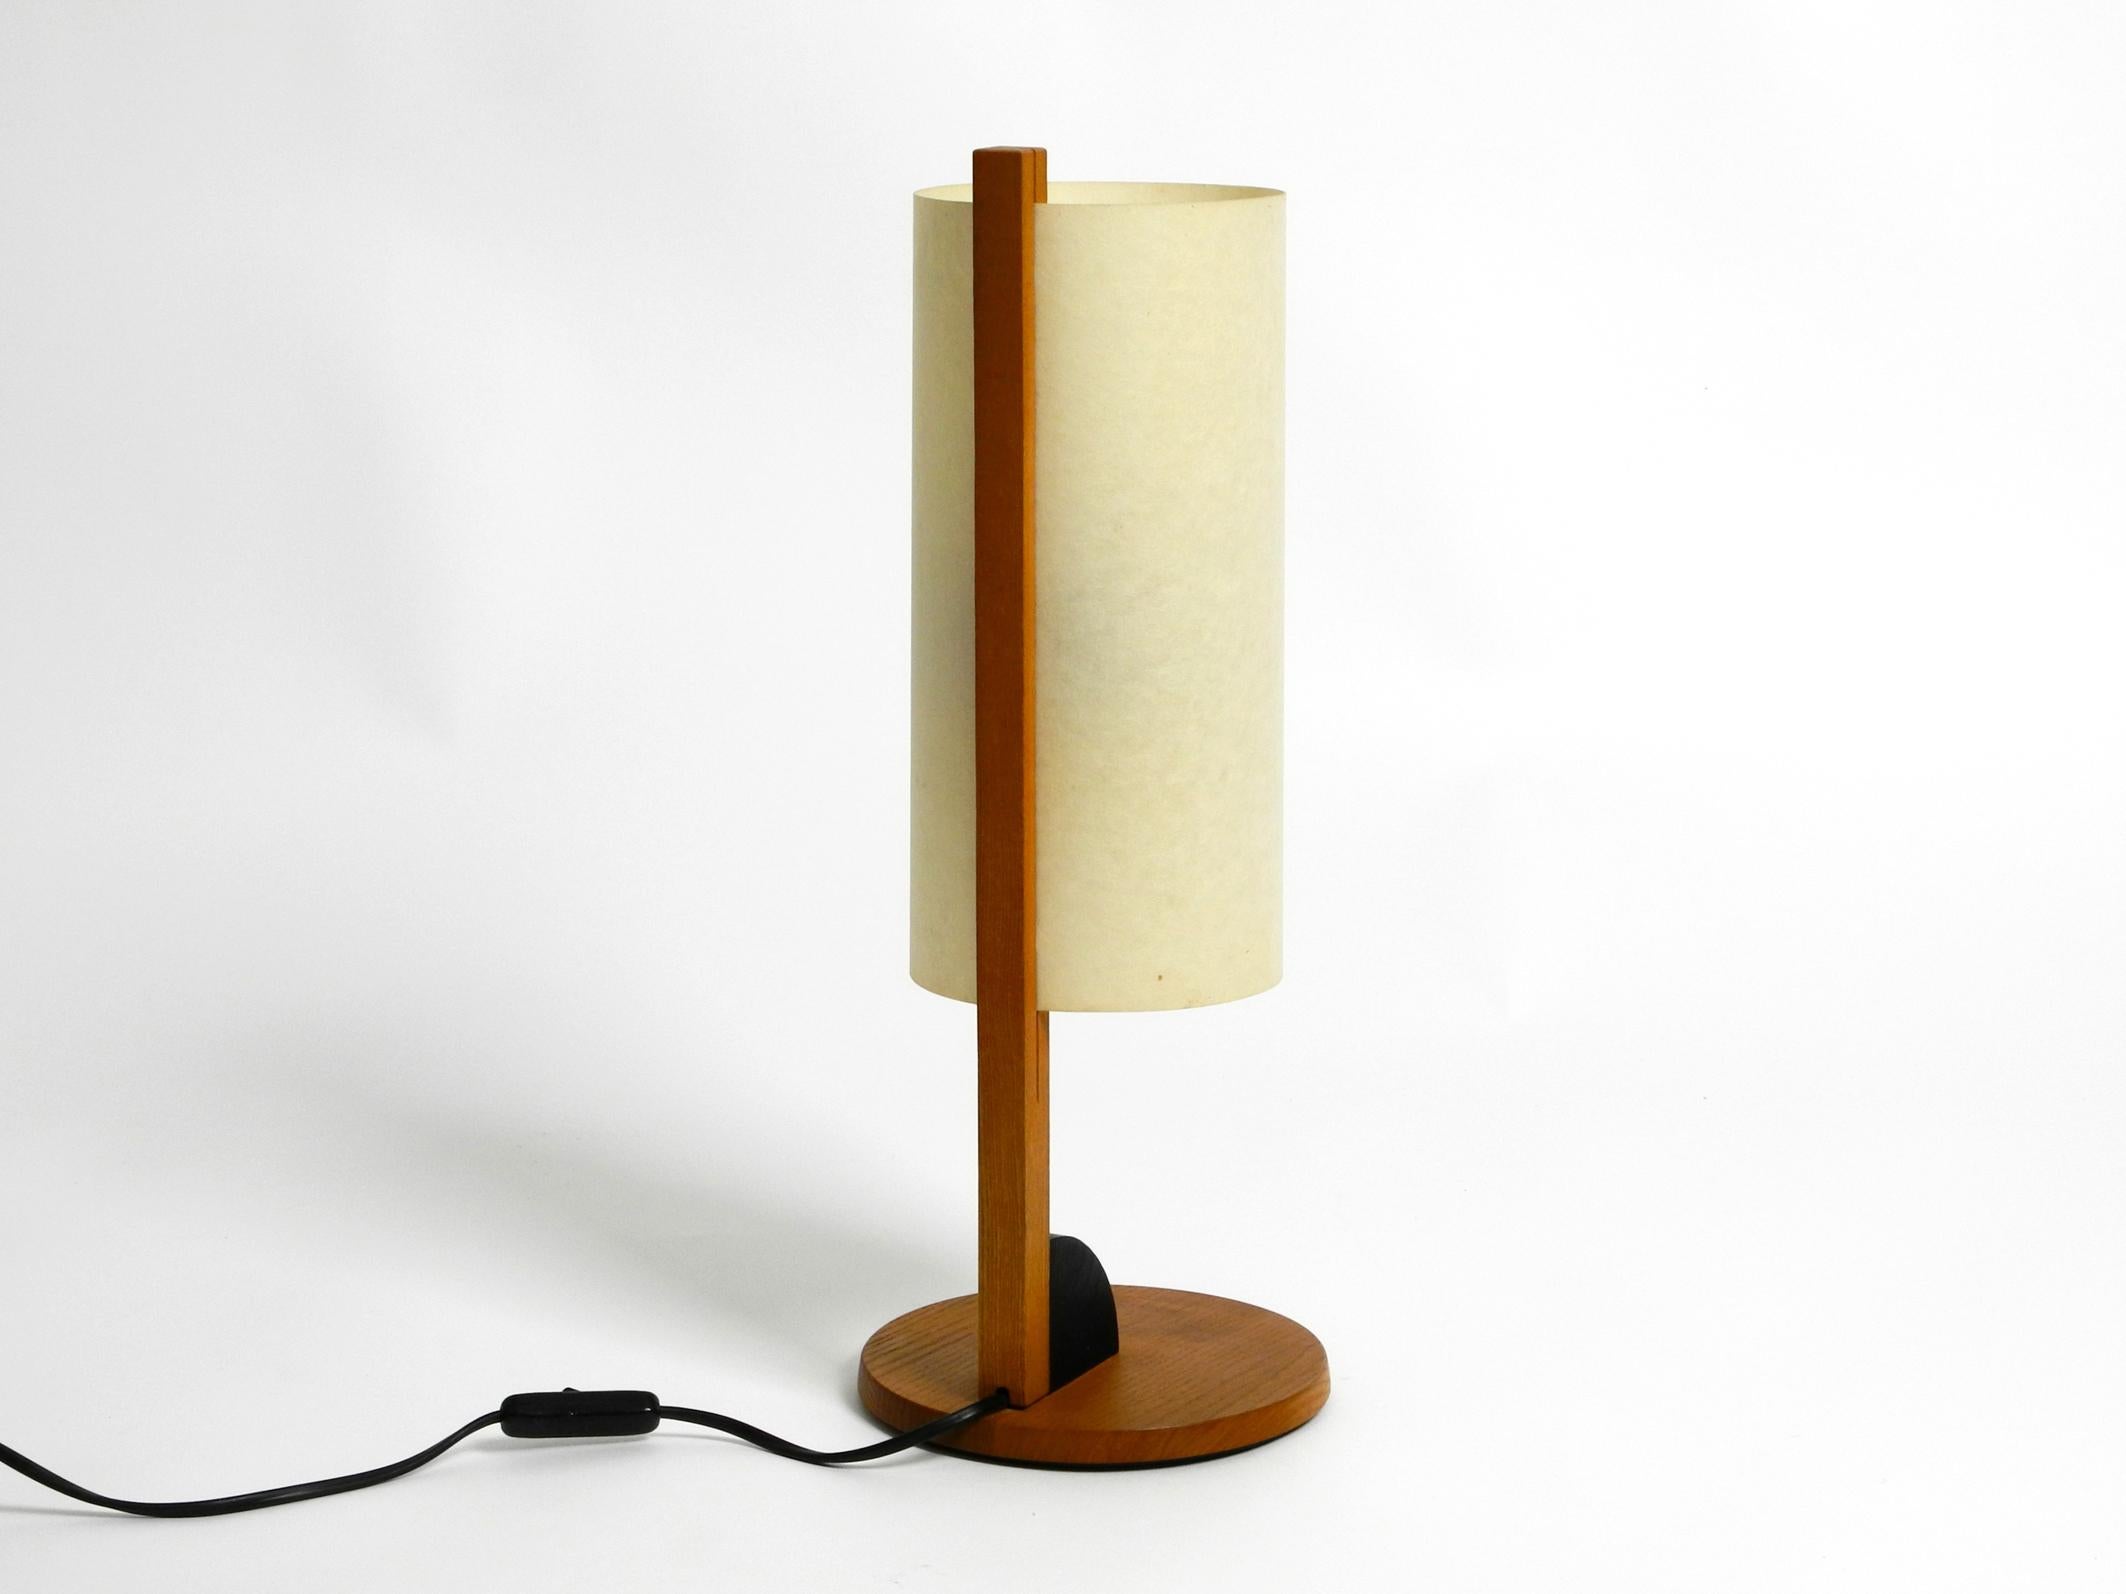 Beautiful large teak table lamp with Lunopal lampshade. 
Great minimalist Postmodern design from the 1980s.
With original label on the frame. Type 7627. Made in Germany.
This table lamp by Domus is no longer produced.
The shade is made of